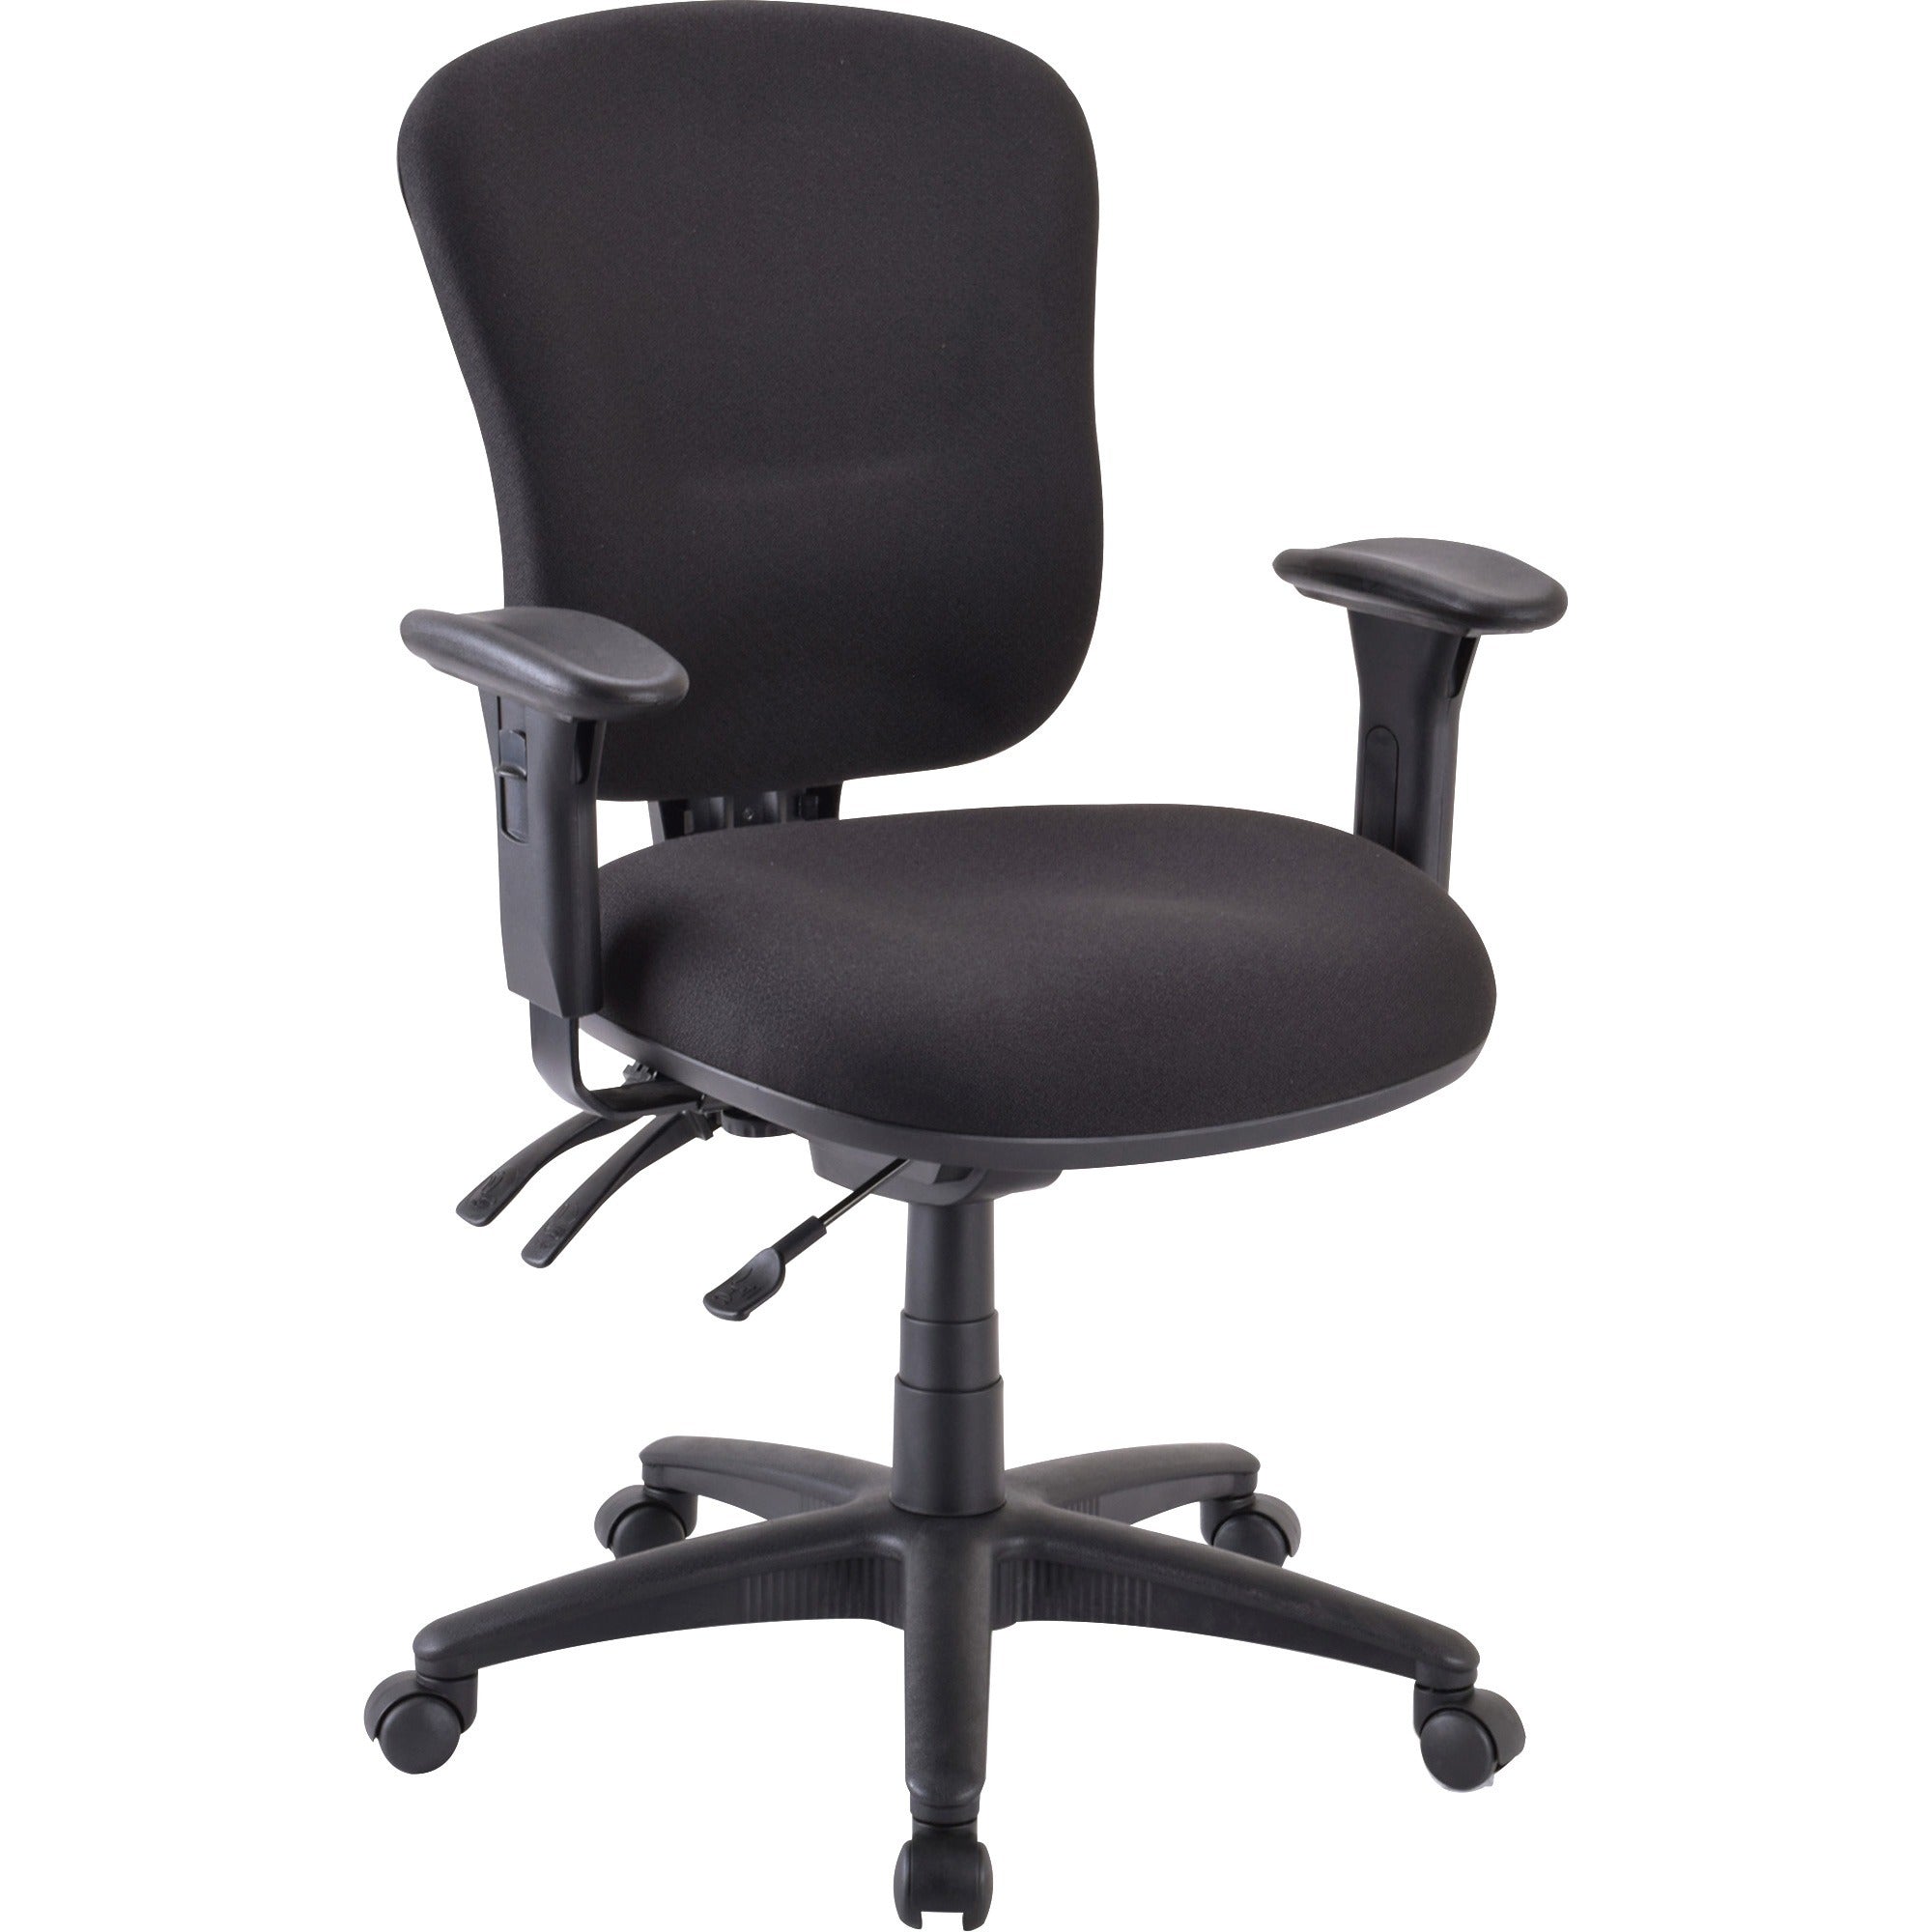 Lorell Accord Series Mid-Back Task Chair - Black Polyester Seat - Black Frame - 1 Each - 